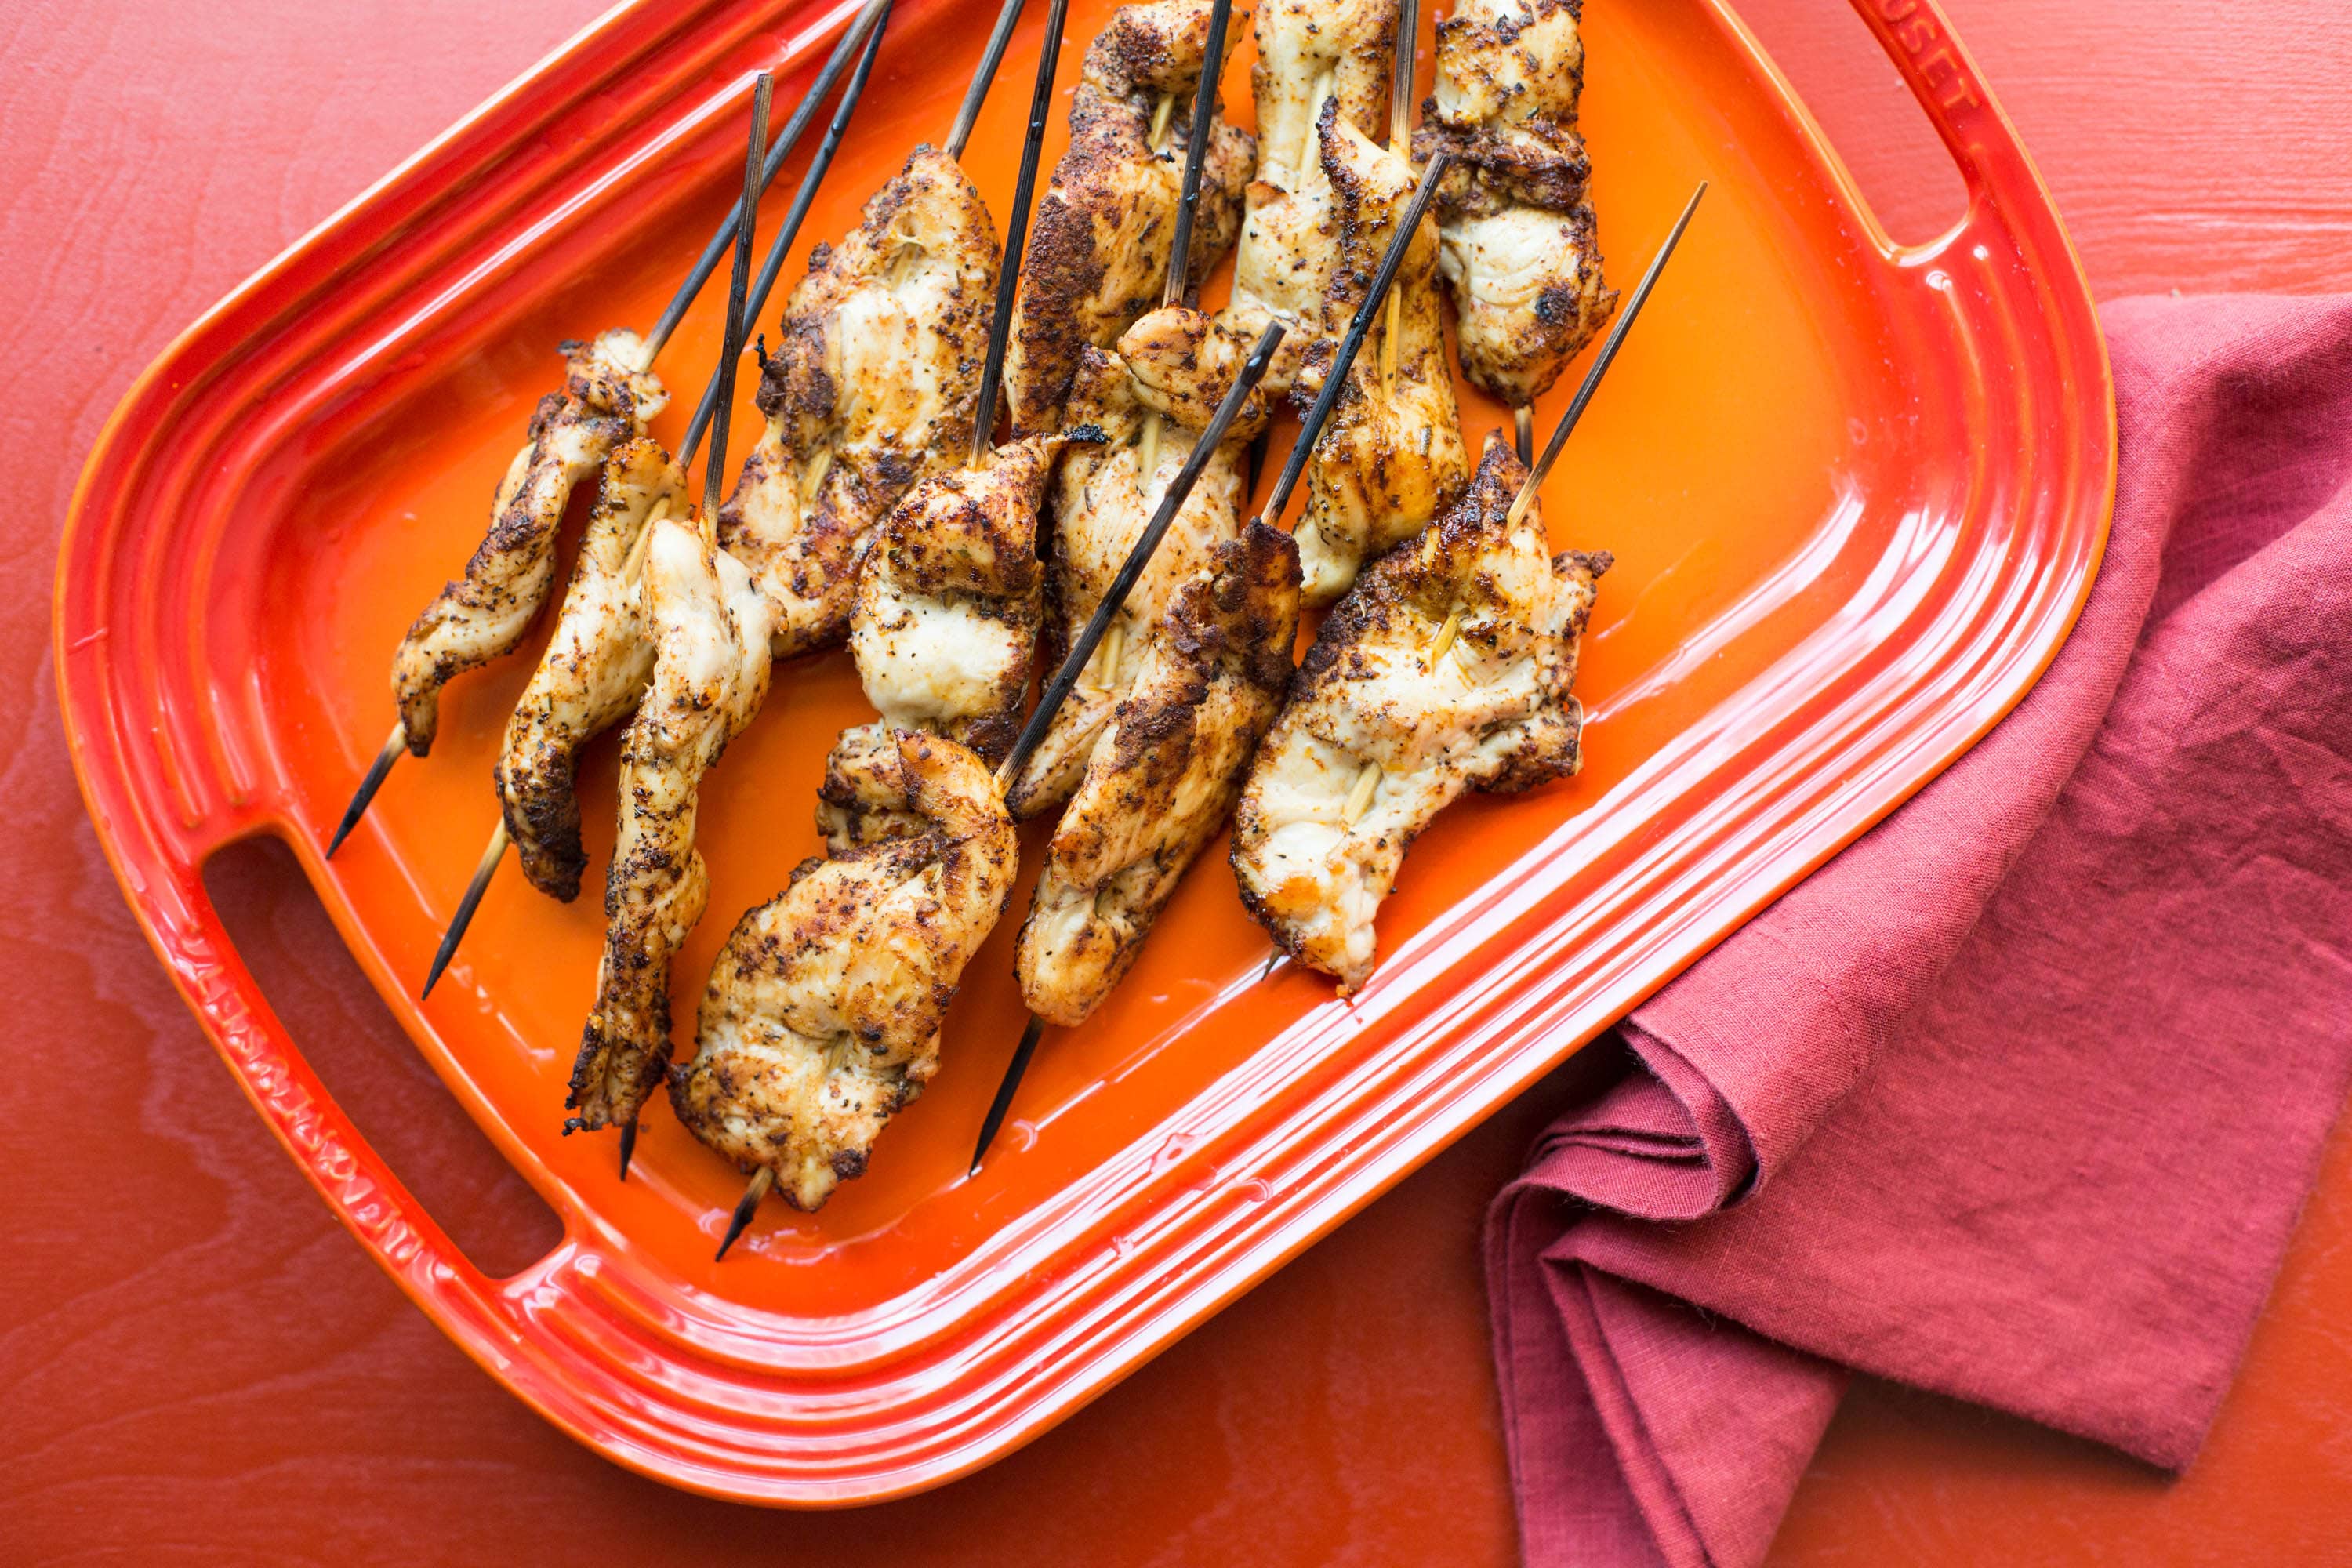 Chicken Tender Skewers with Spiced Curry Rub on red plate.